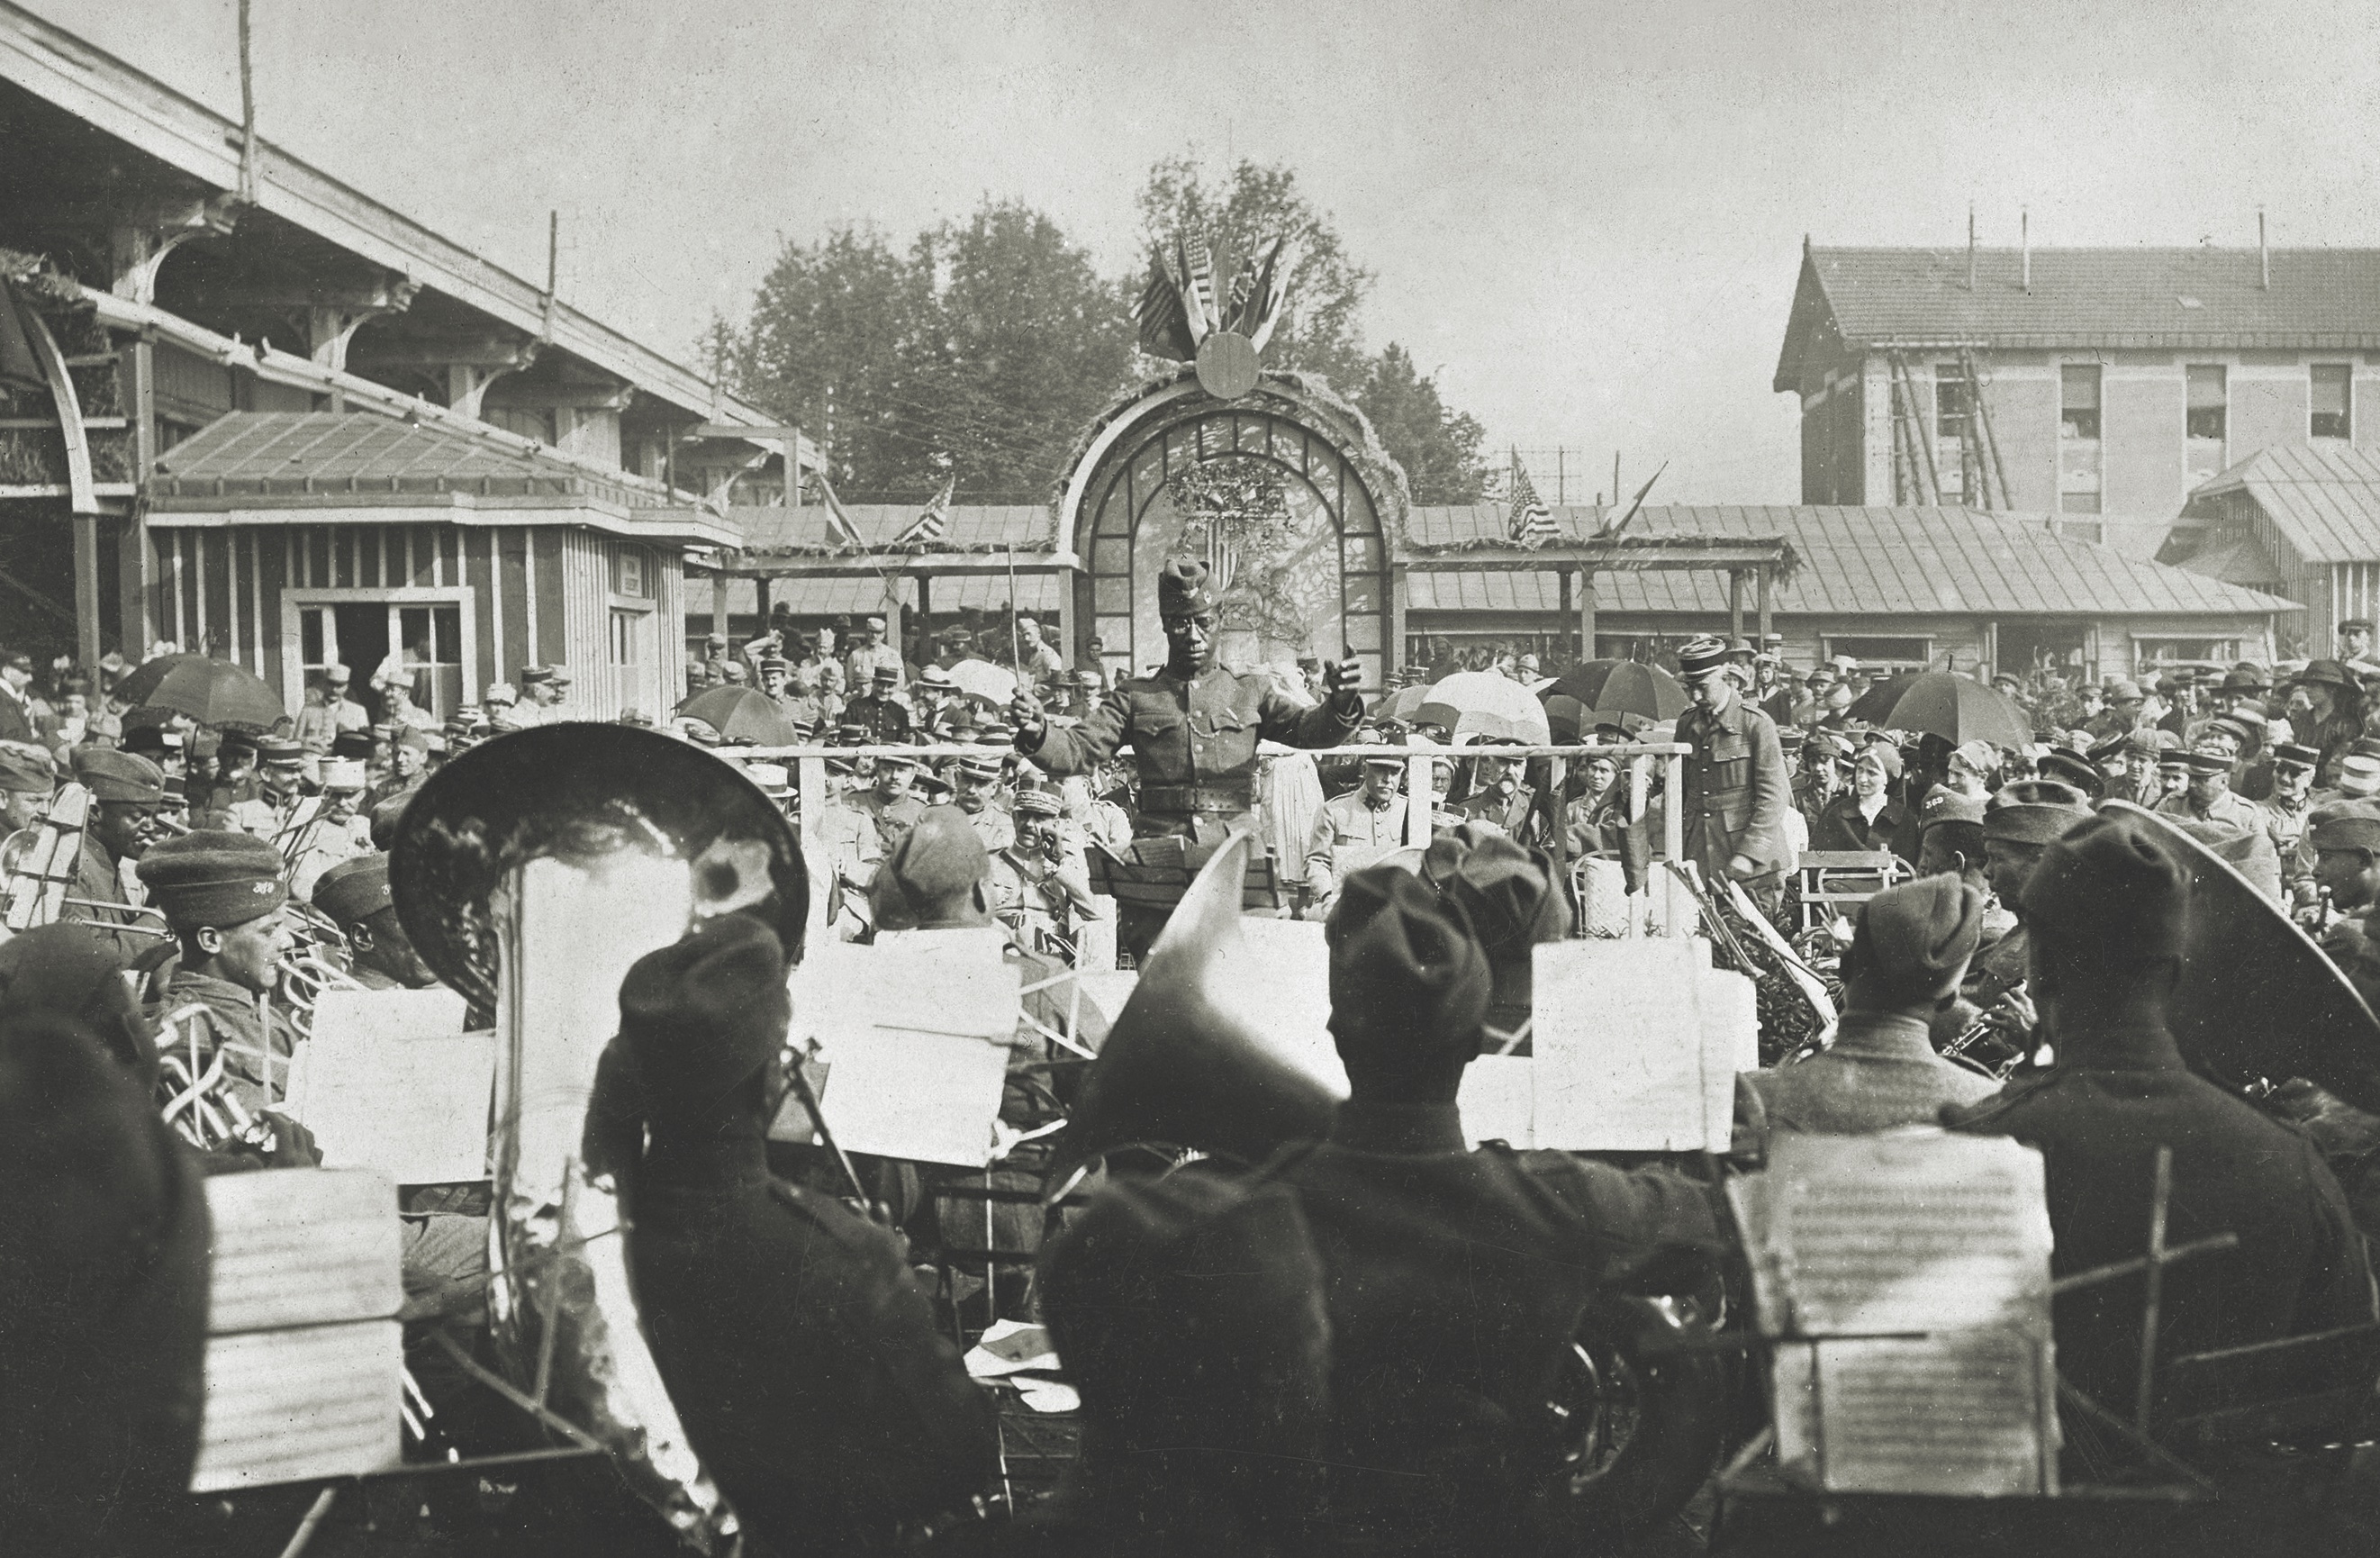 On July 4, 1918, with Europe leading his machine-gun company in combat, Second Lieutenant Eugene Mikell leads the 369th’s band in a concert at French general Henri Gouraud’s headquarters in Châlons-sur-Marne. (Adoc-Photos/Getty Images)